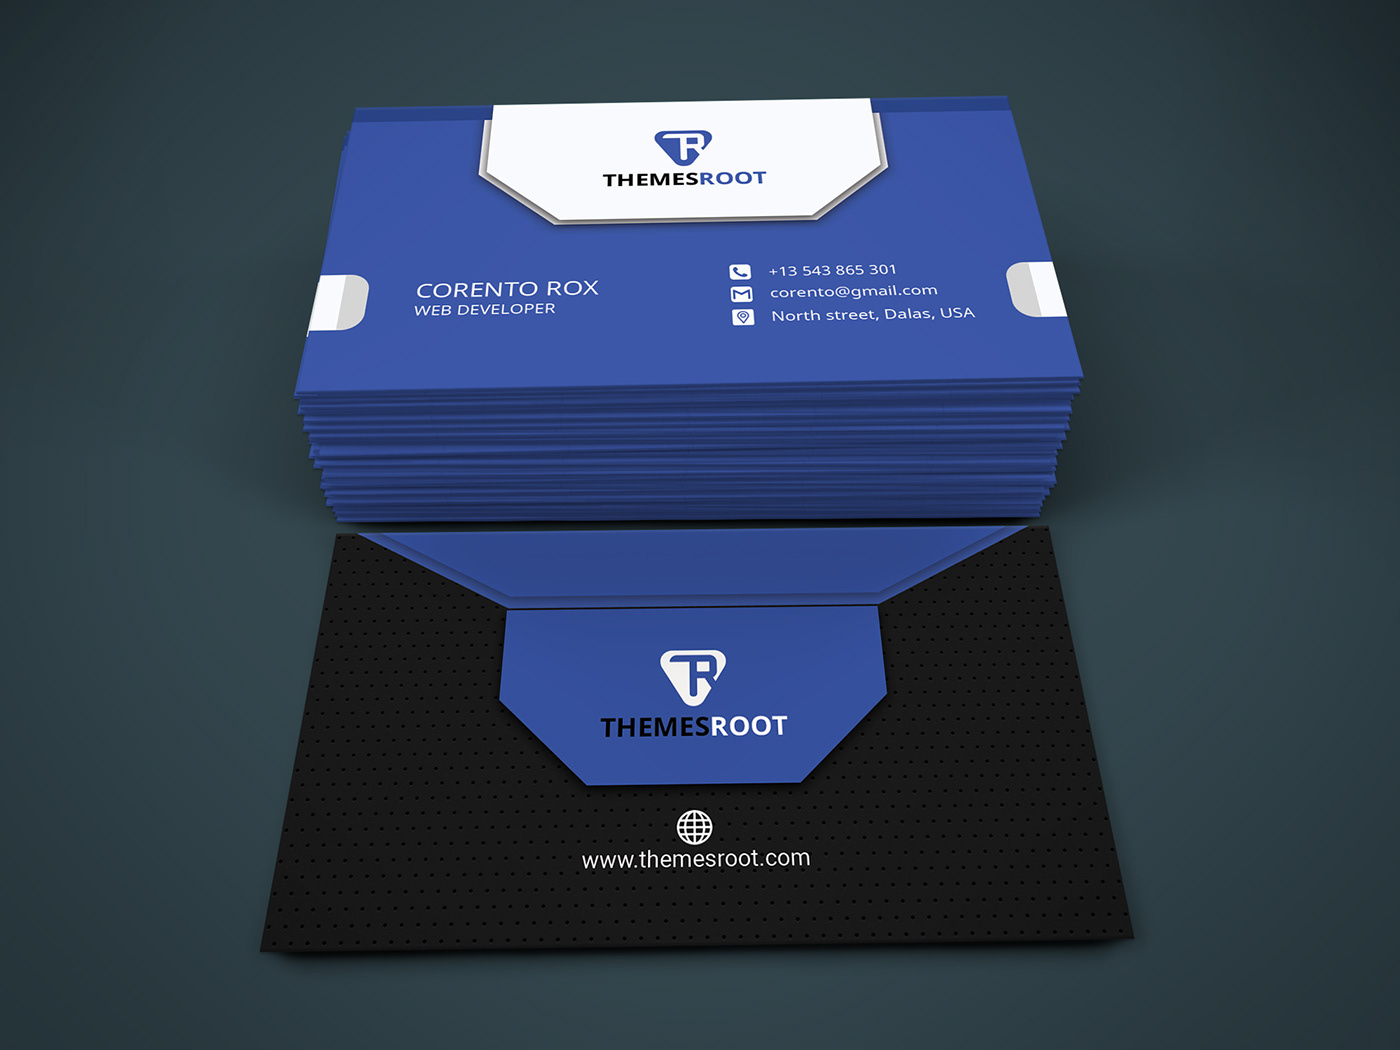 themes root cool business card web developer card new business card templat free business card 2019 mockup download free card business card idea creative business card business card mockup